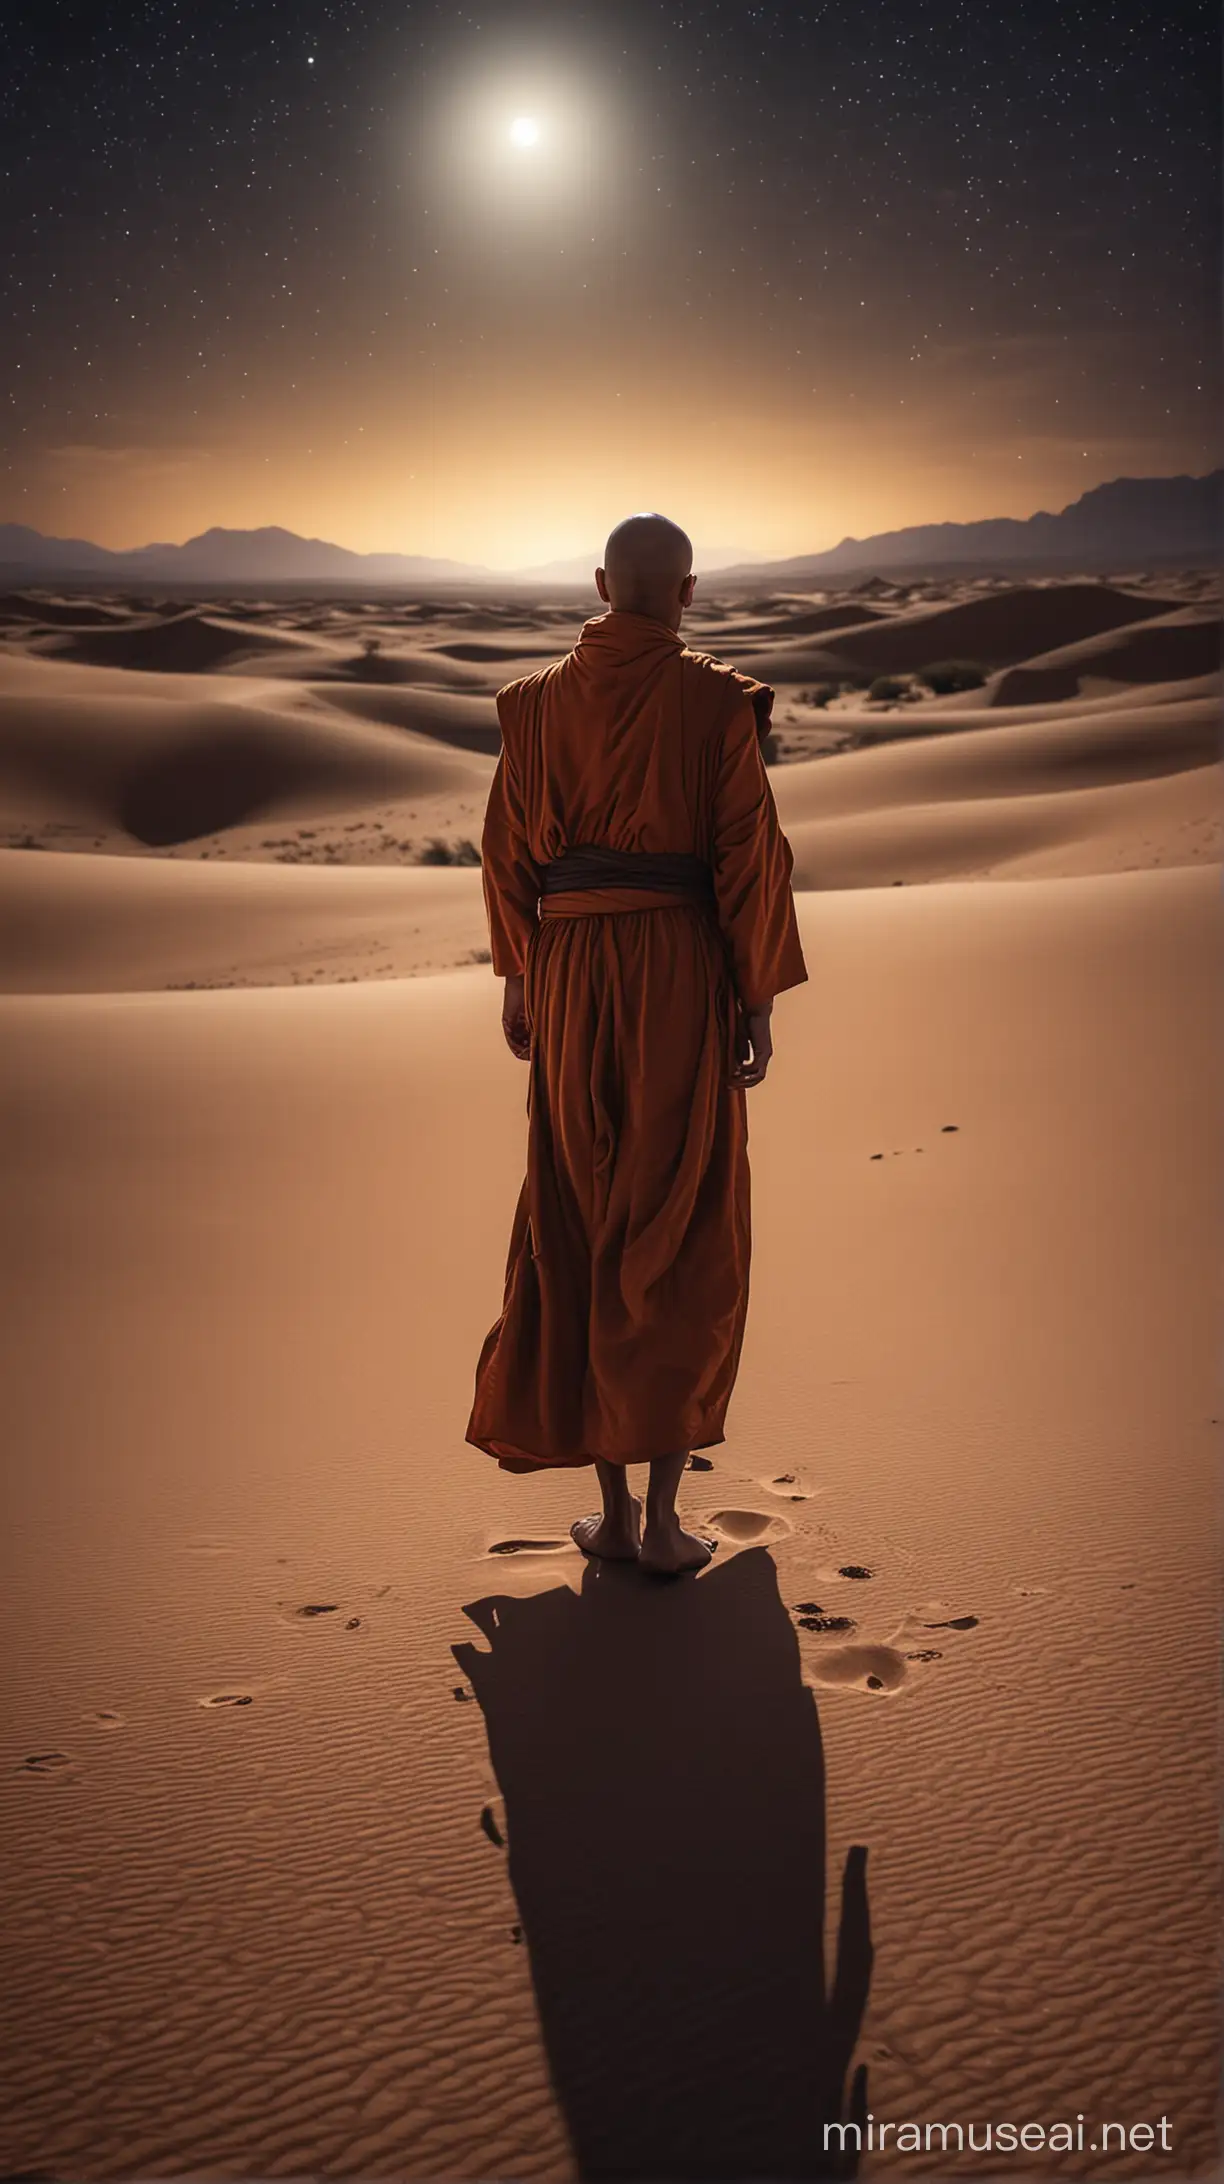 Solitary Monk Walking in the Desert at Night